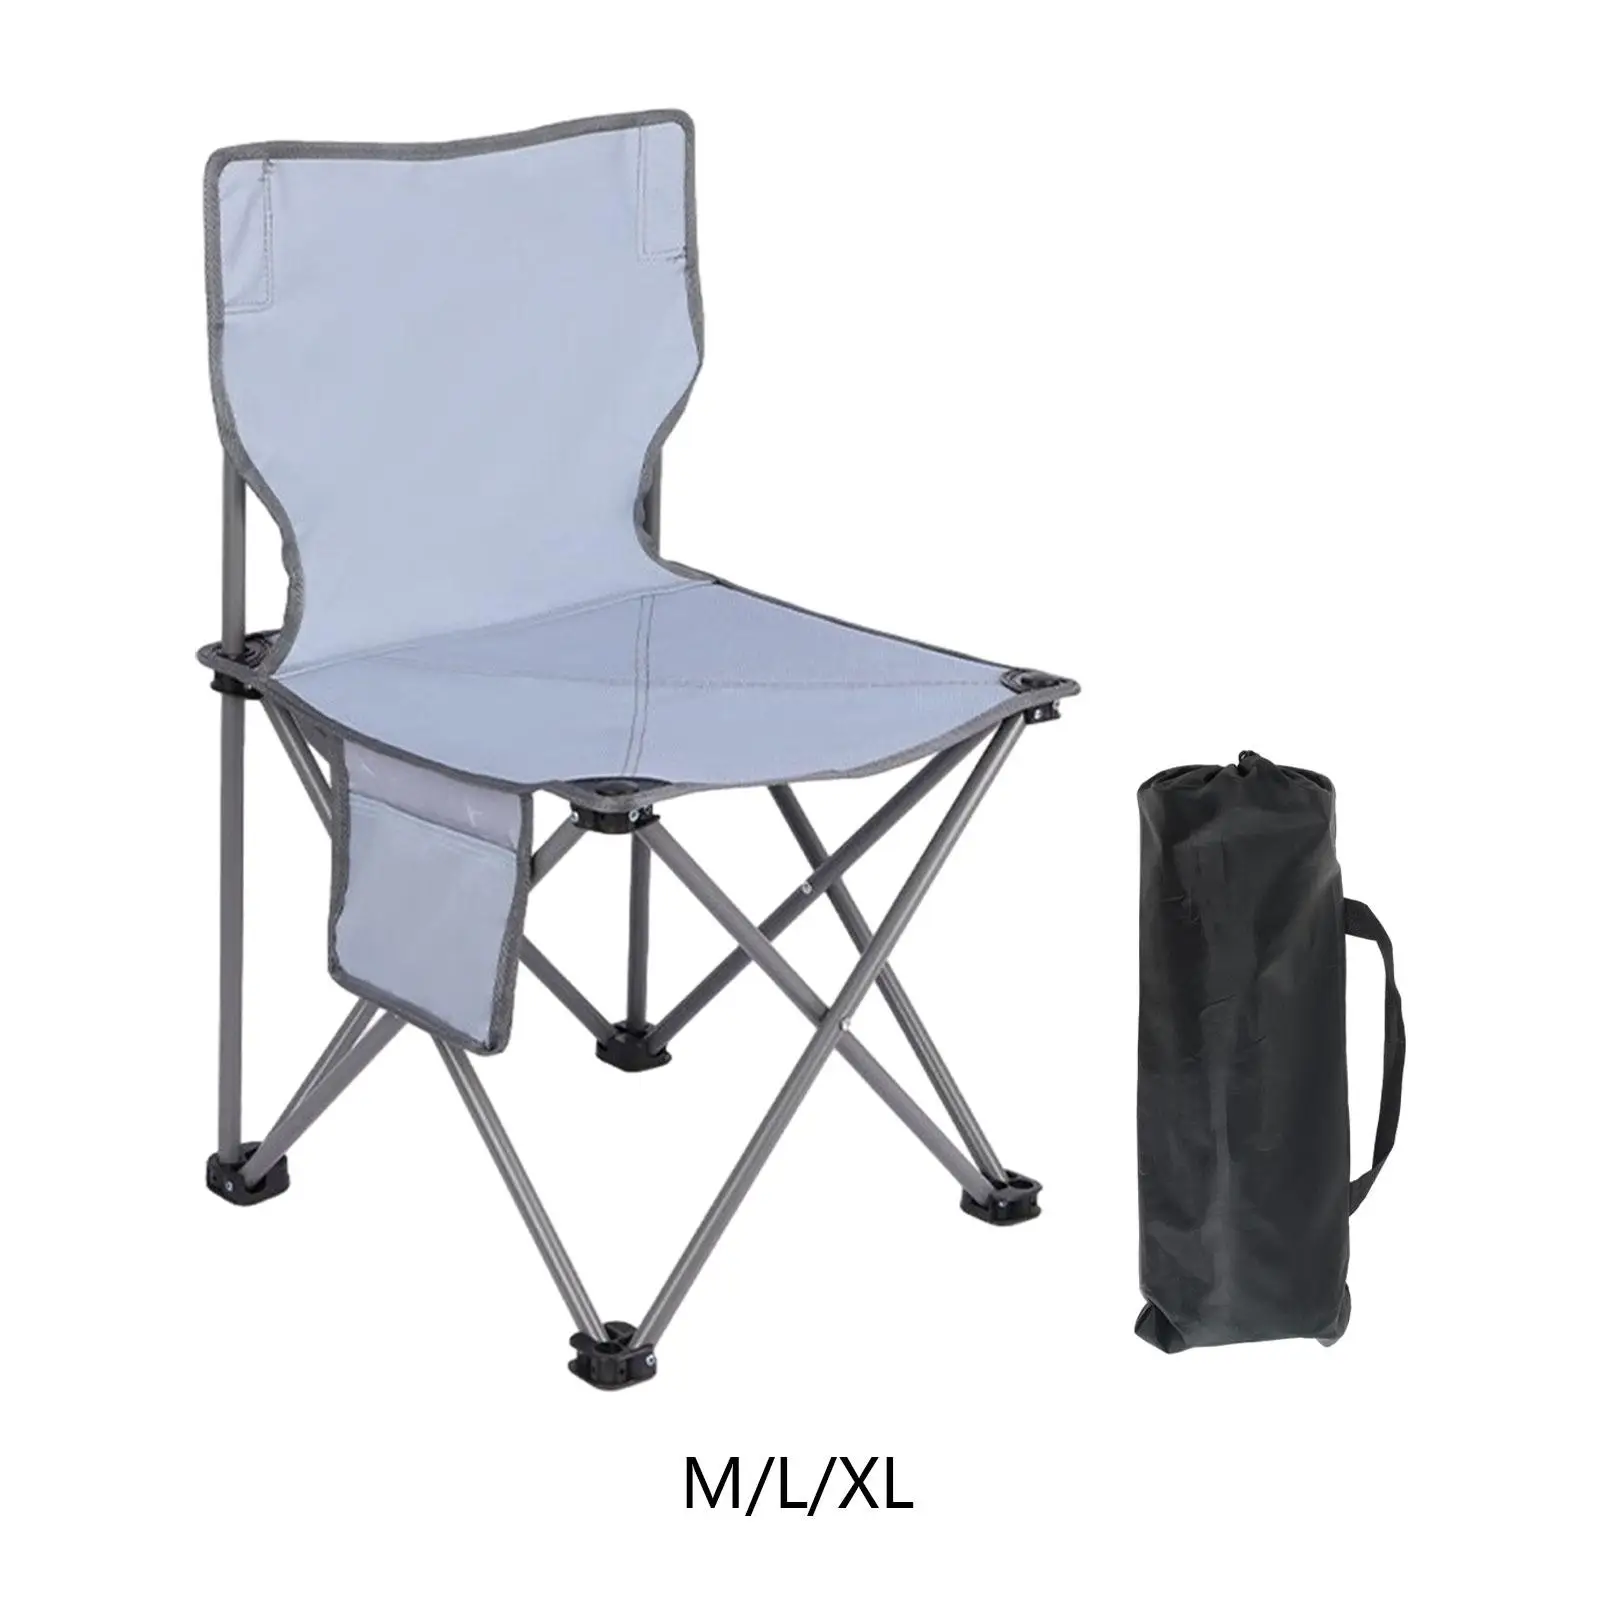 Portable Camping Chair with Side Pocket Outdoor Furniture High Back Folding Chair for Outside for Park Beach Picnic Patio Lawn